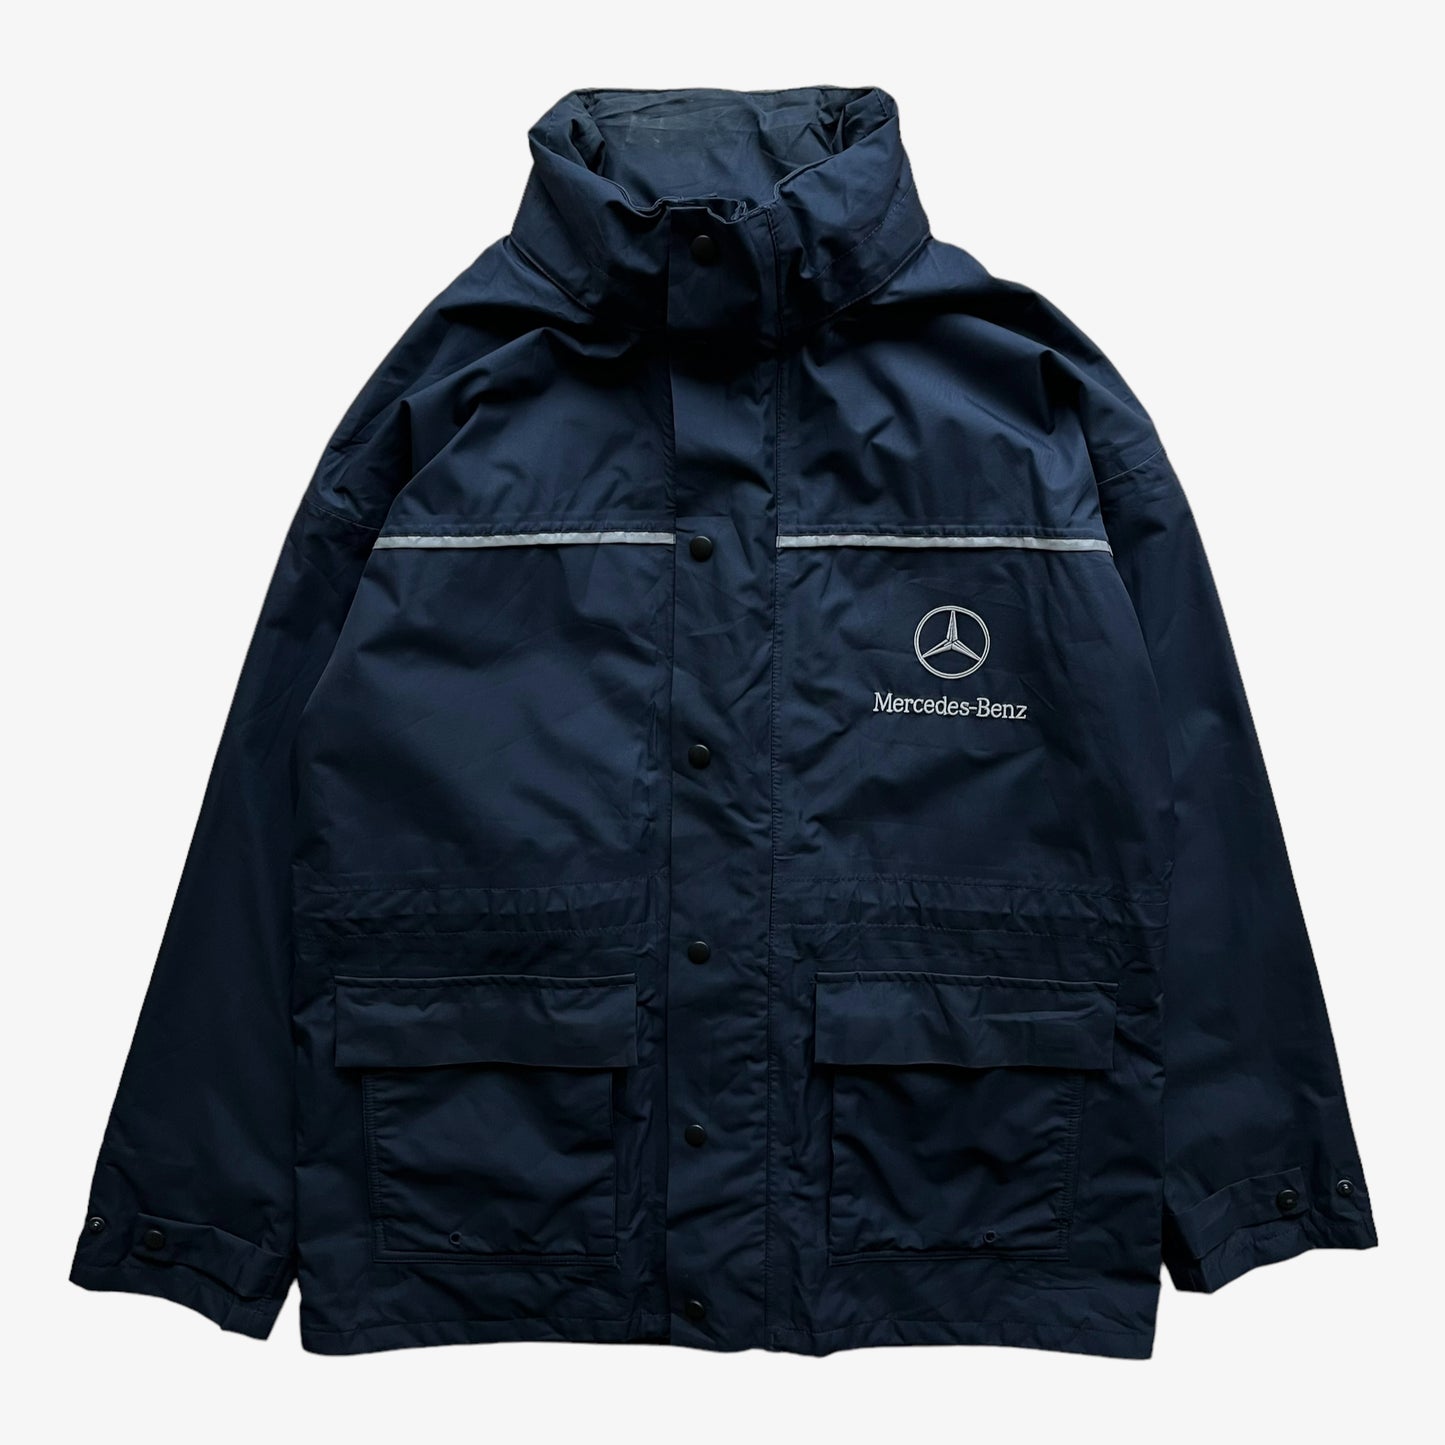 Vintage 90s Mercedes Benz Service Jacket With Back Spell Out - Casspios Dream